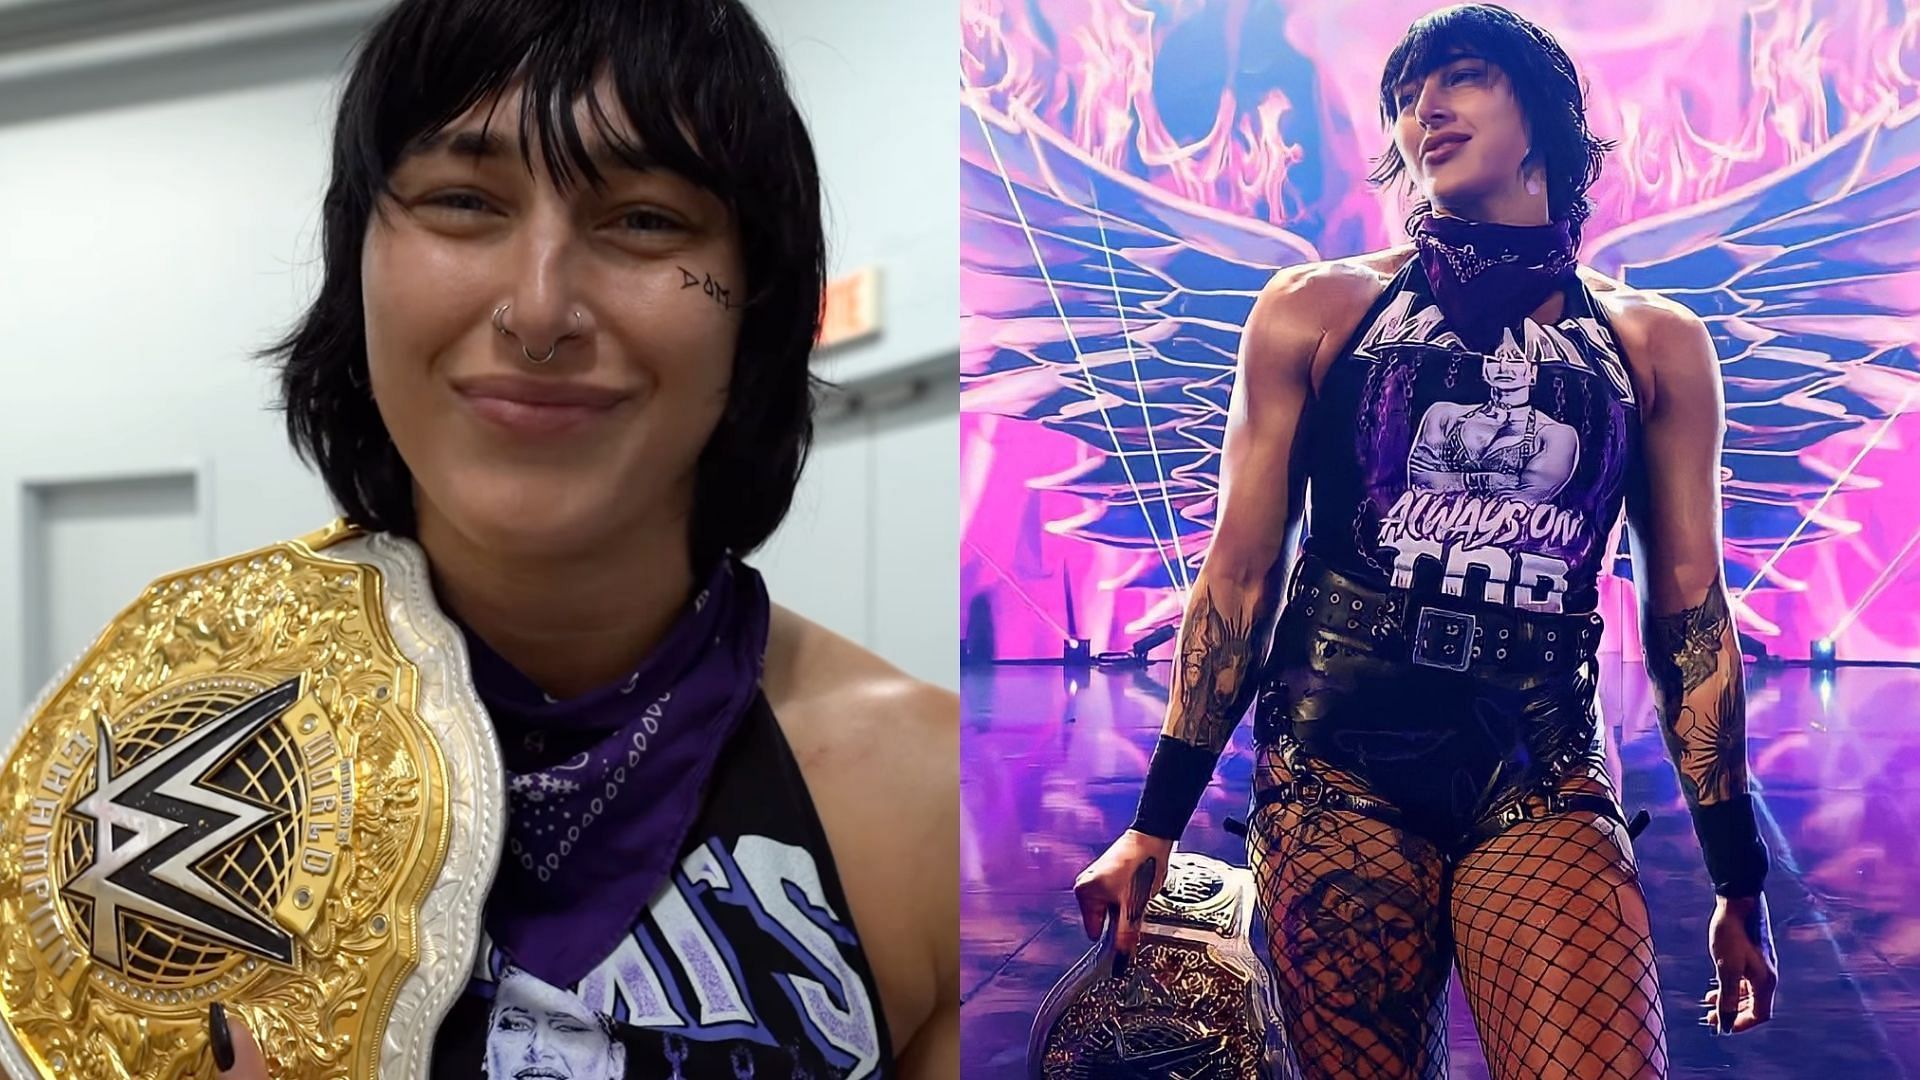 Released Wwe Superstar Sends Message To Rhea Ripley Ahead Of Raw